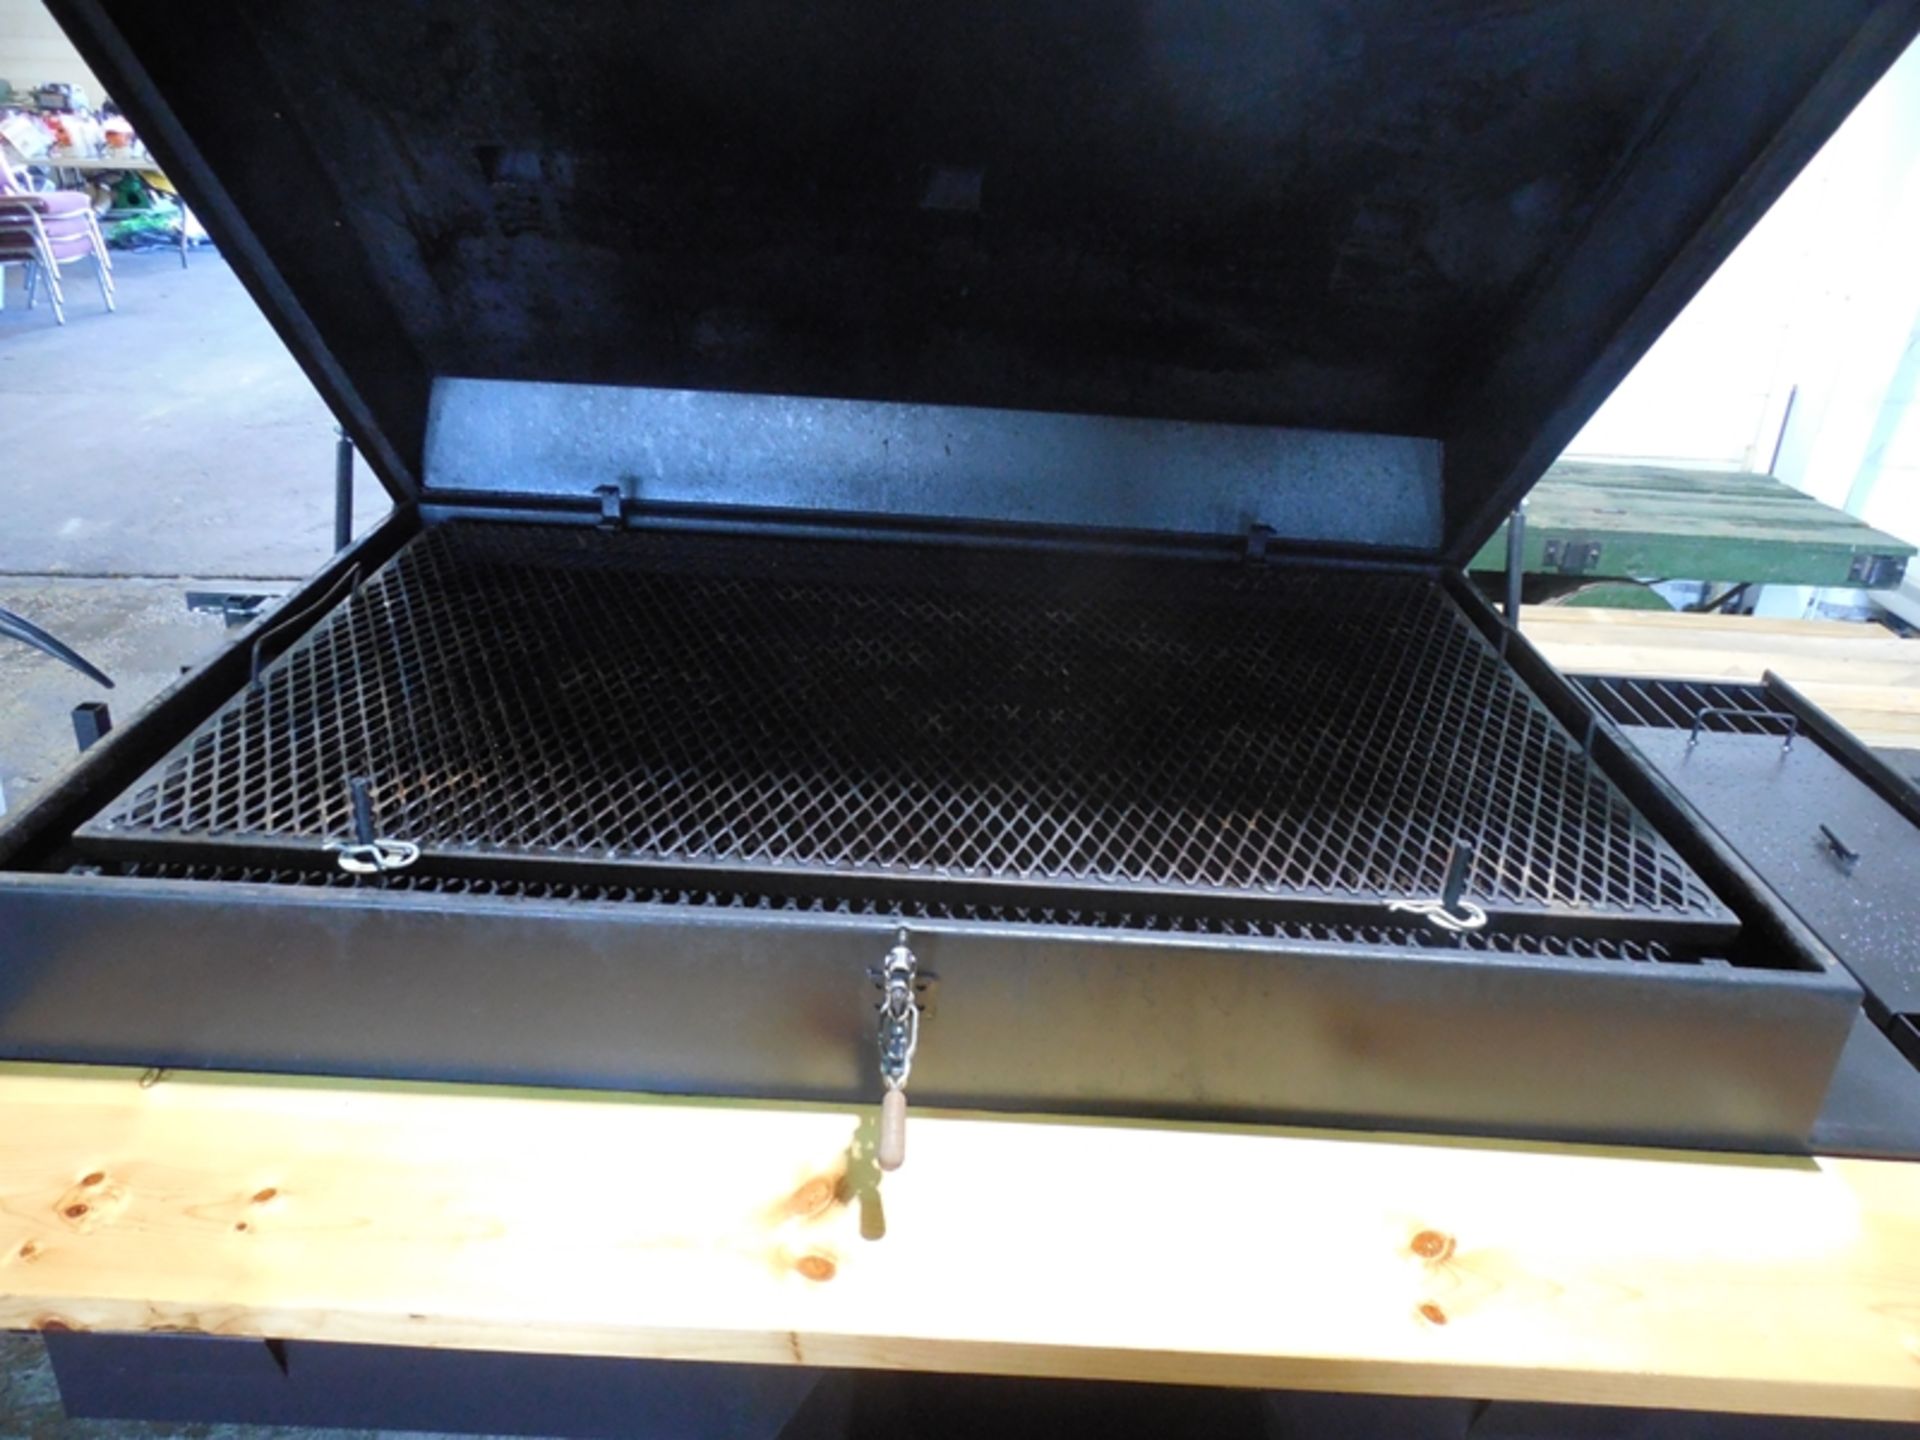 BQ barbeque pig cooker with turn grate and rear burners - Image 4 of 4